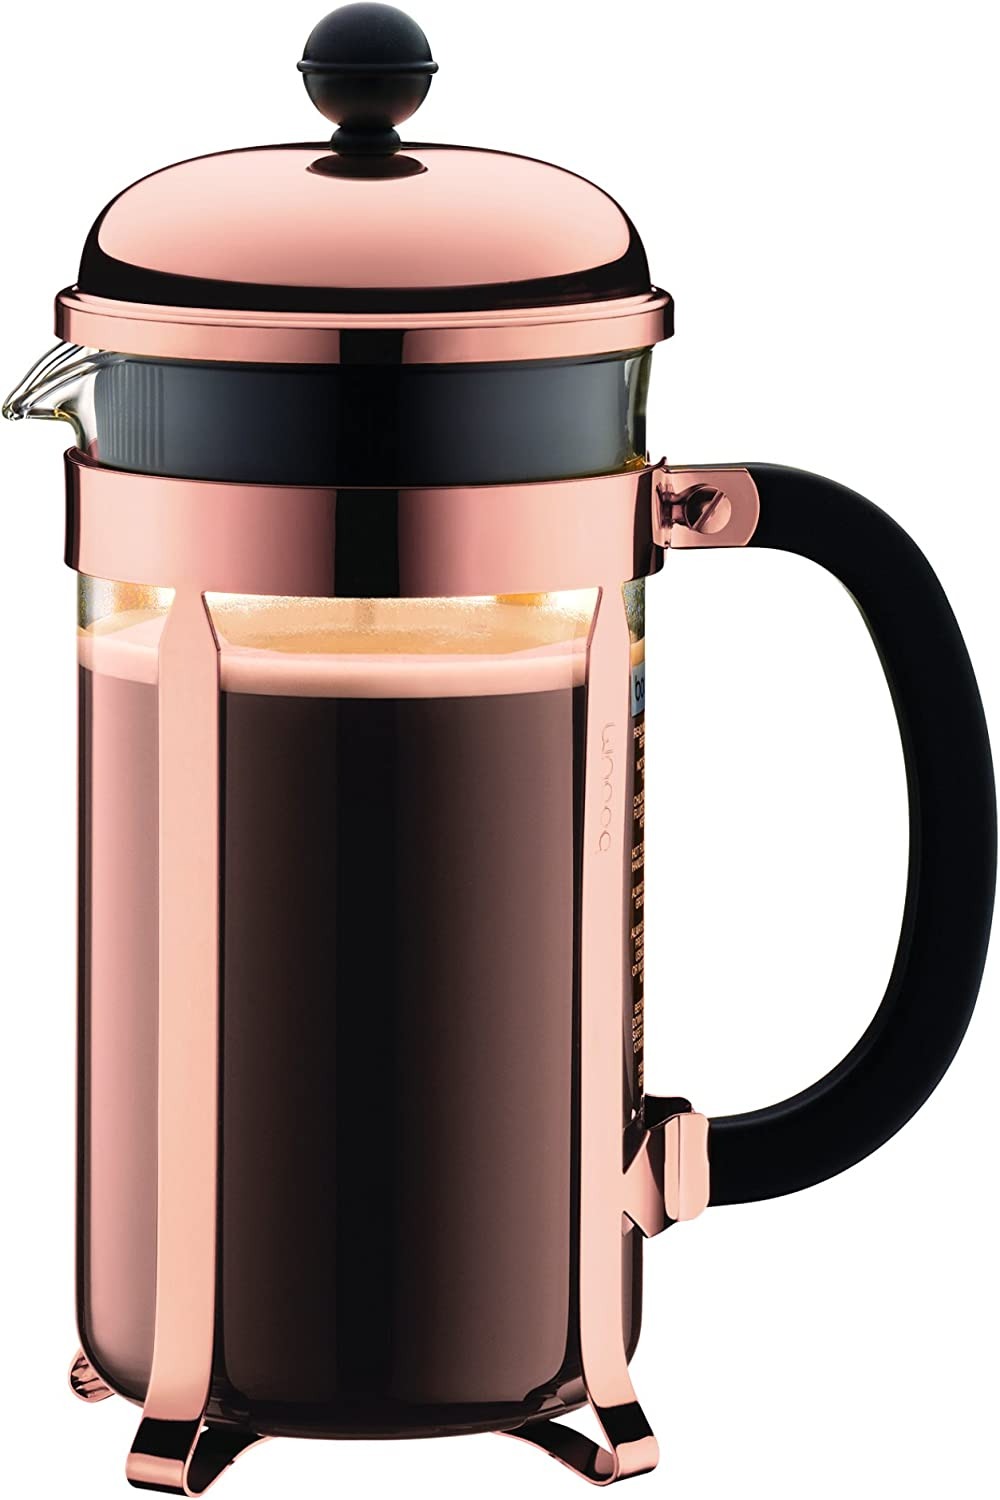 15 French Press Gift Sets For Coffee Lovers